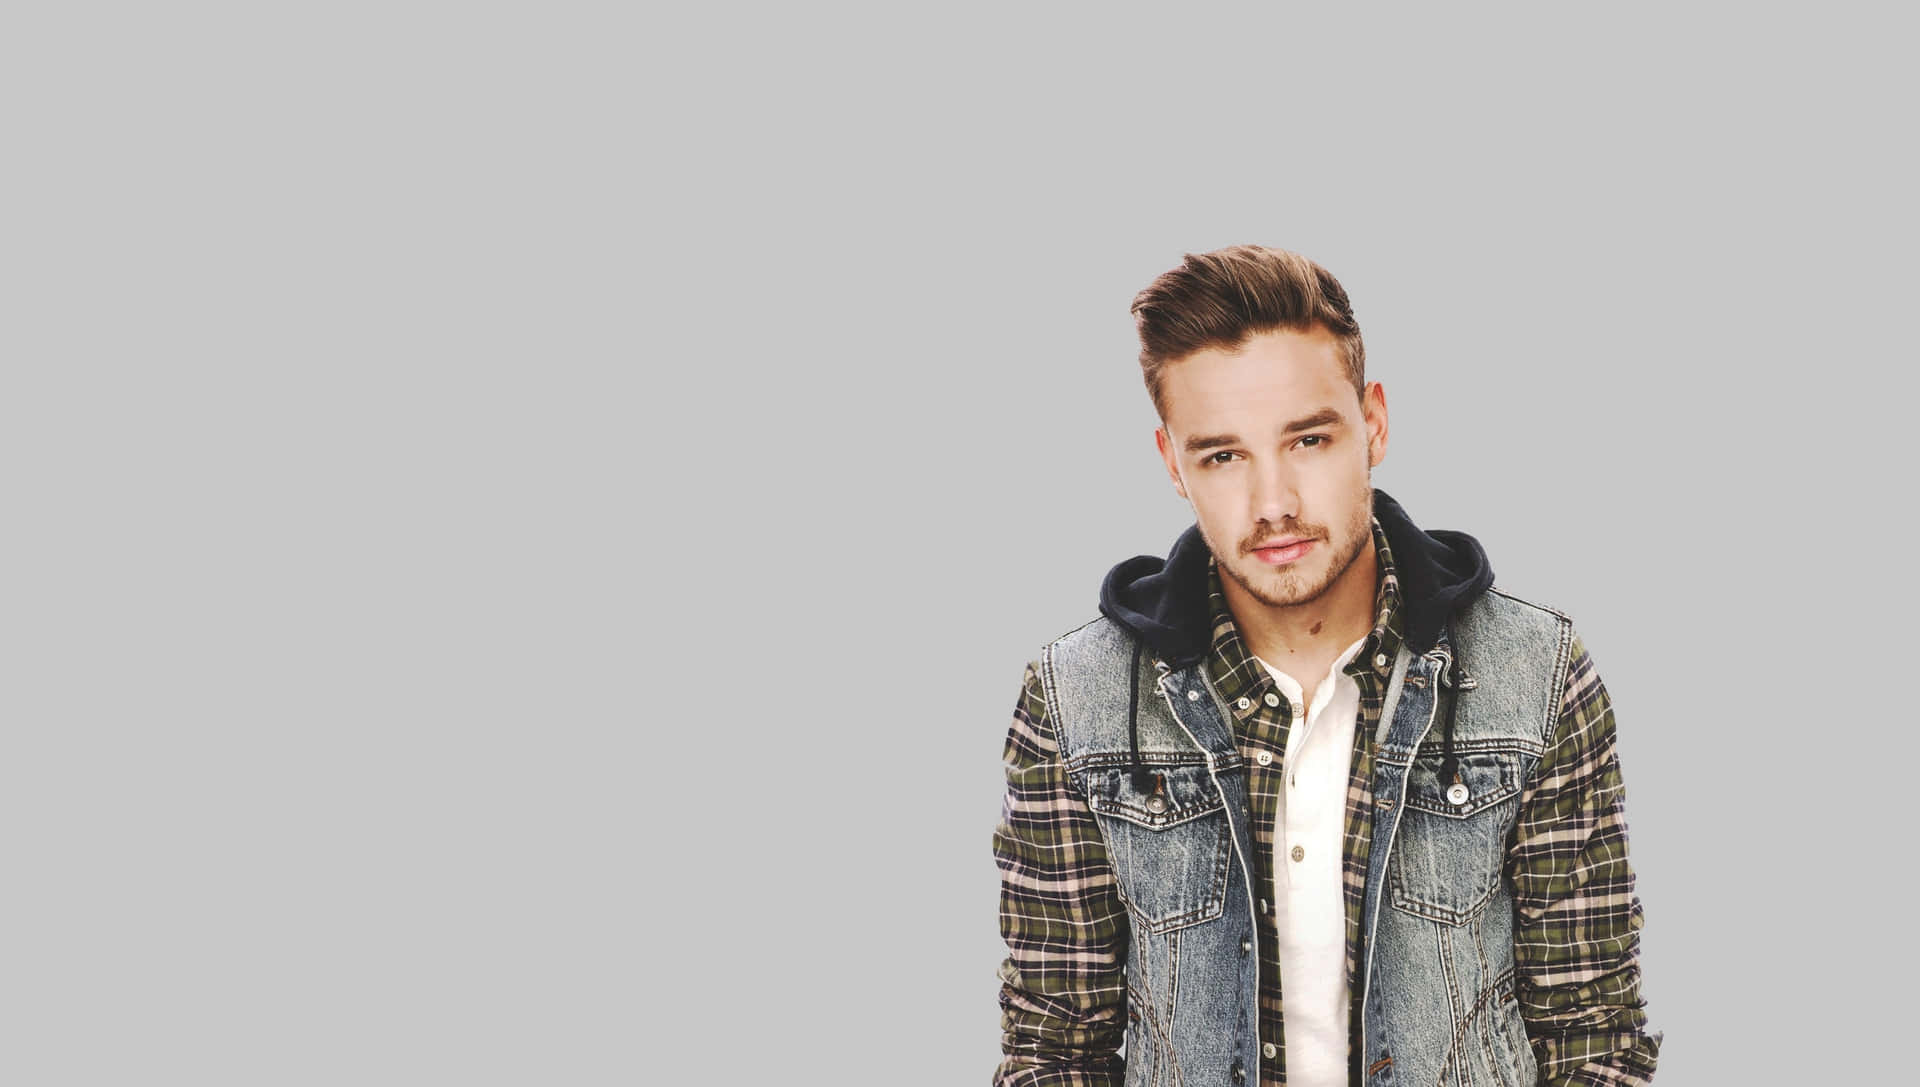 Liam Payne Gives a Tranquil Smile Wallpaper